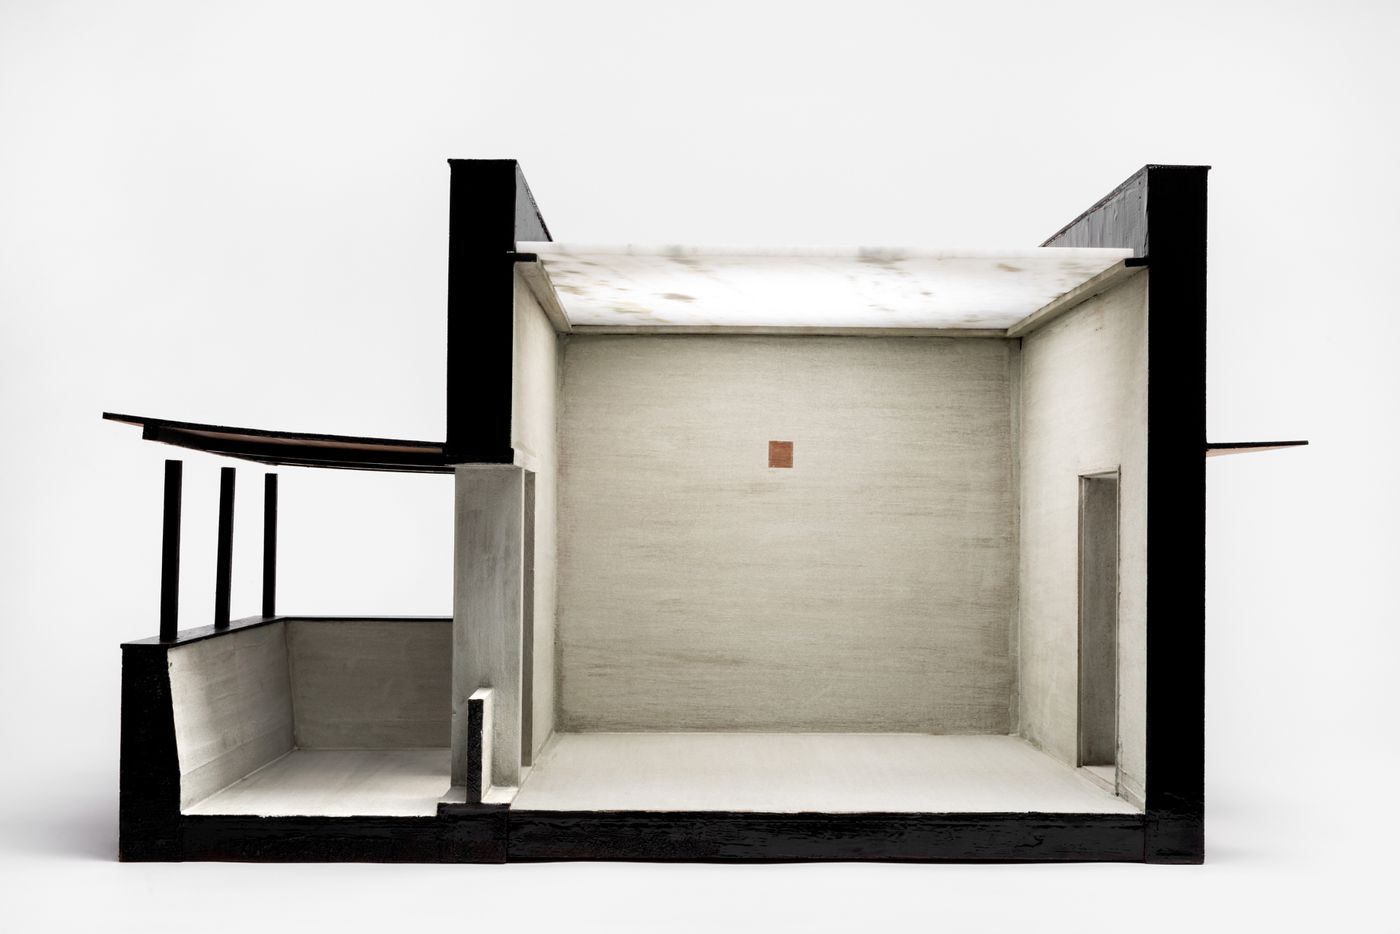 Weavers' Studio : model of gallery testing spatial arrangement and quality of light